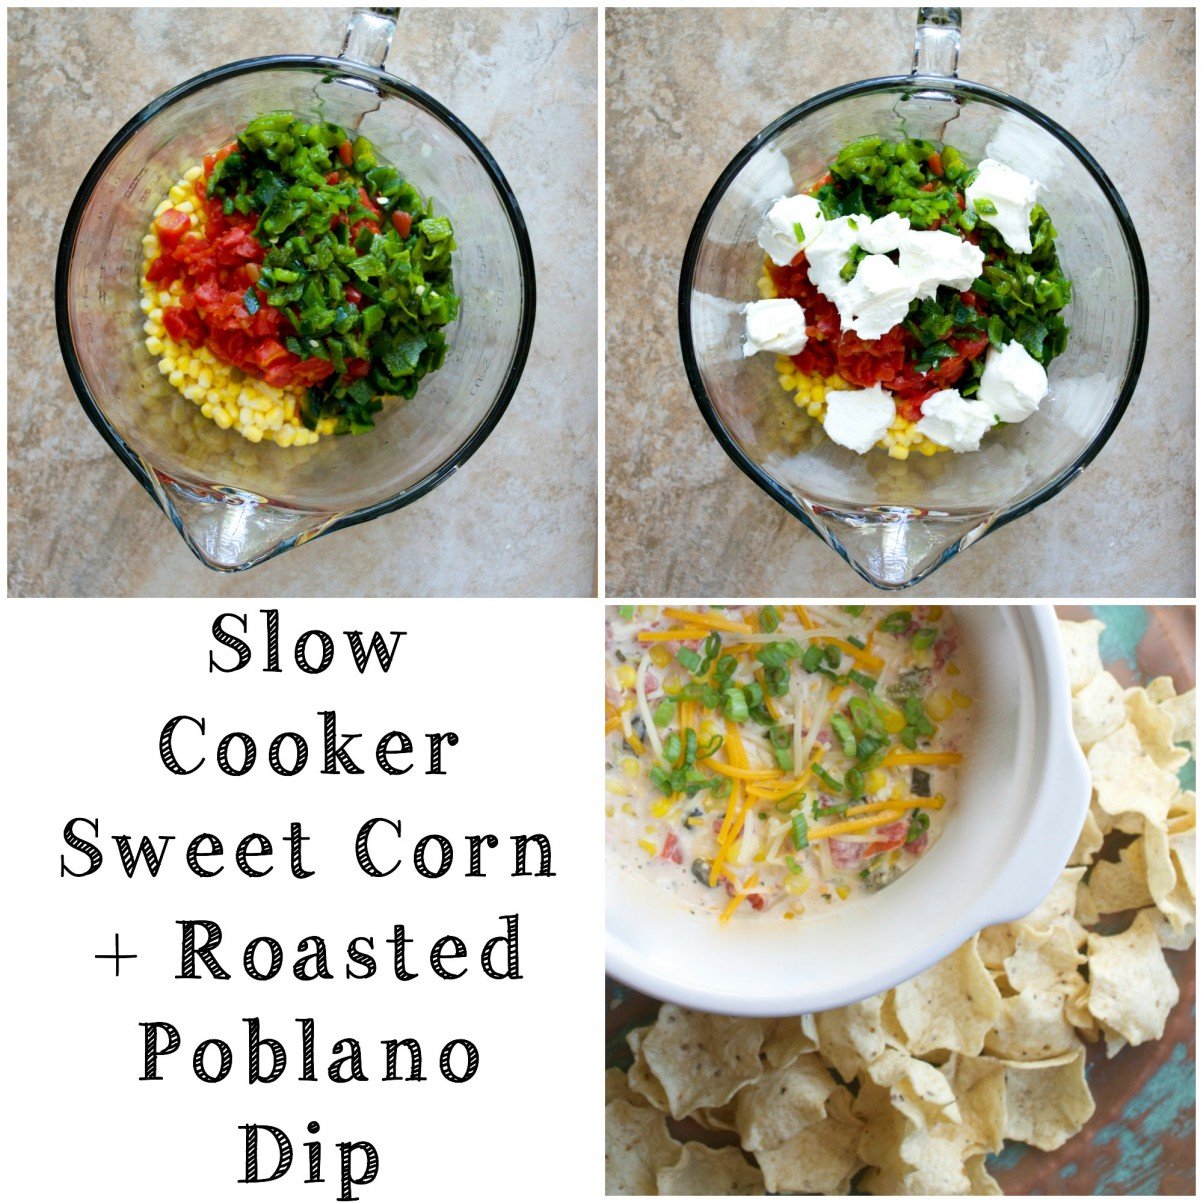 Slow Cooker Sweet Corn Dip makes for an impressive appetizer without any work! Just toss your ingredients in the slow cooker and come home to a creamy, cheesy dip!